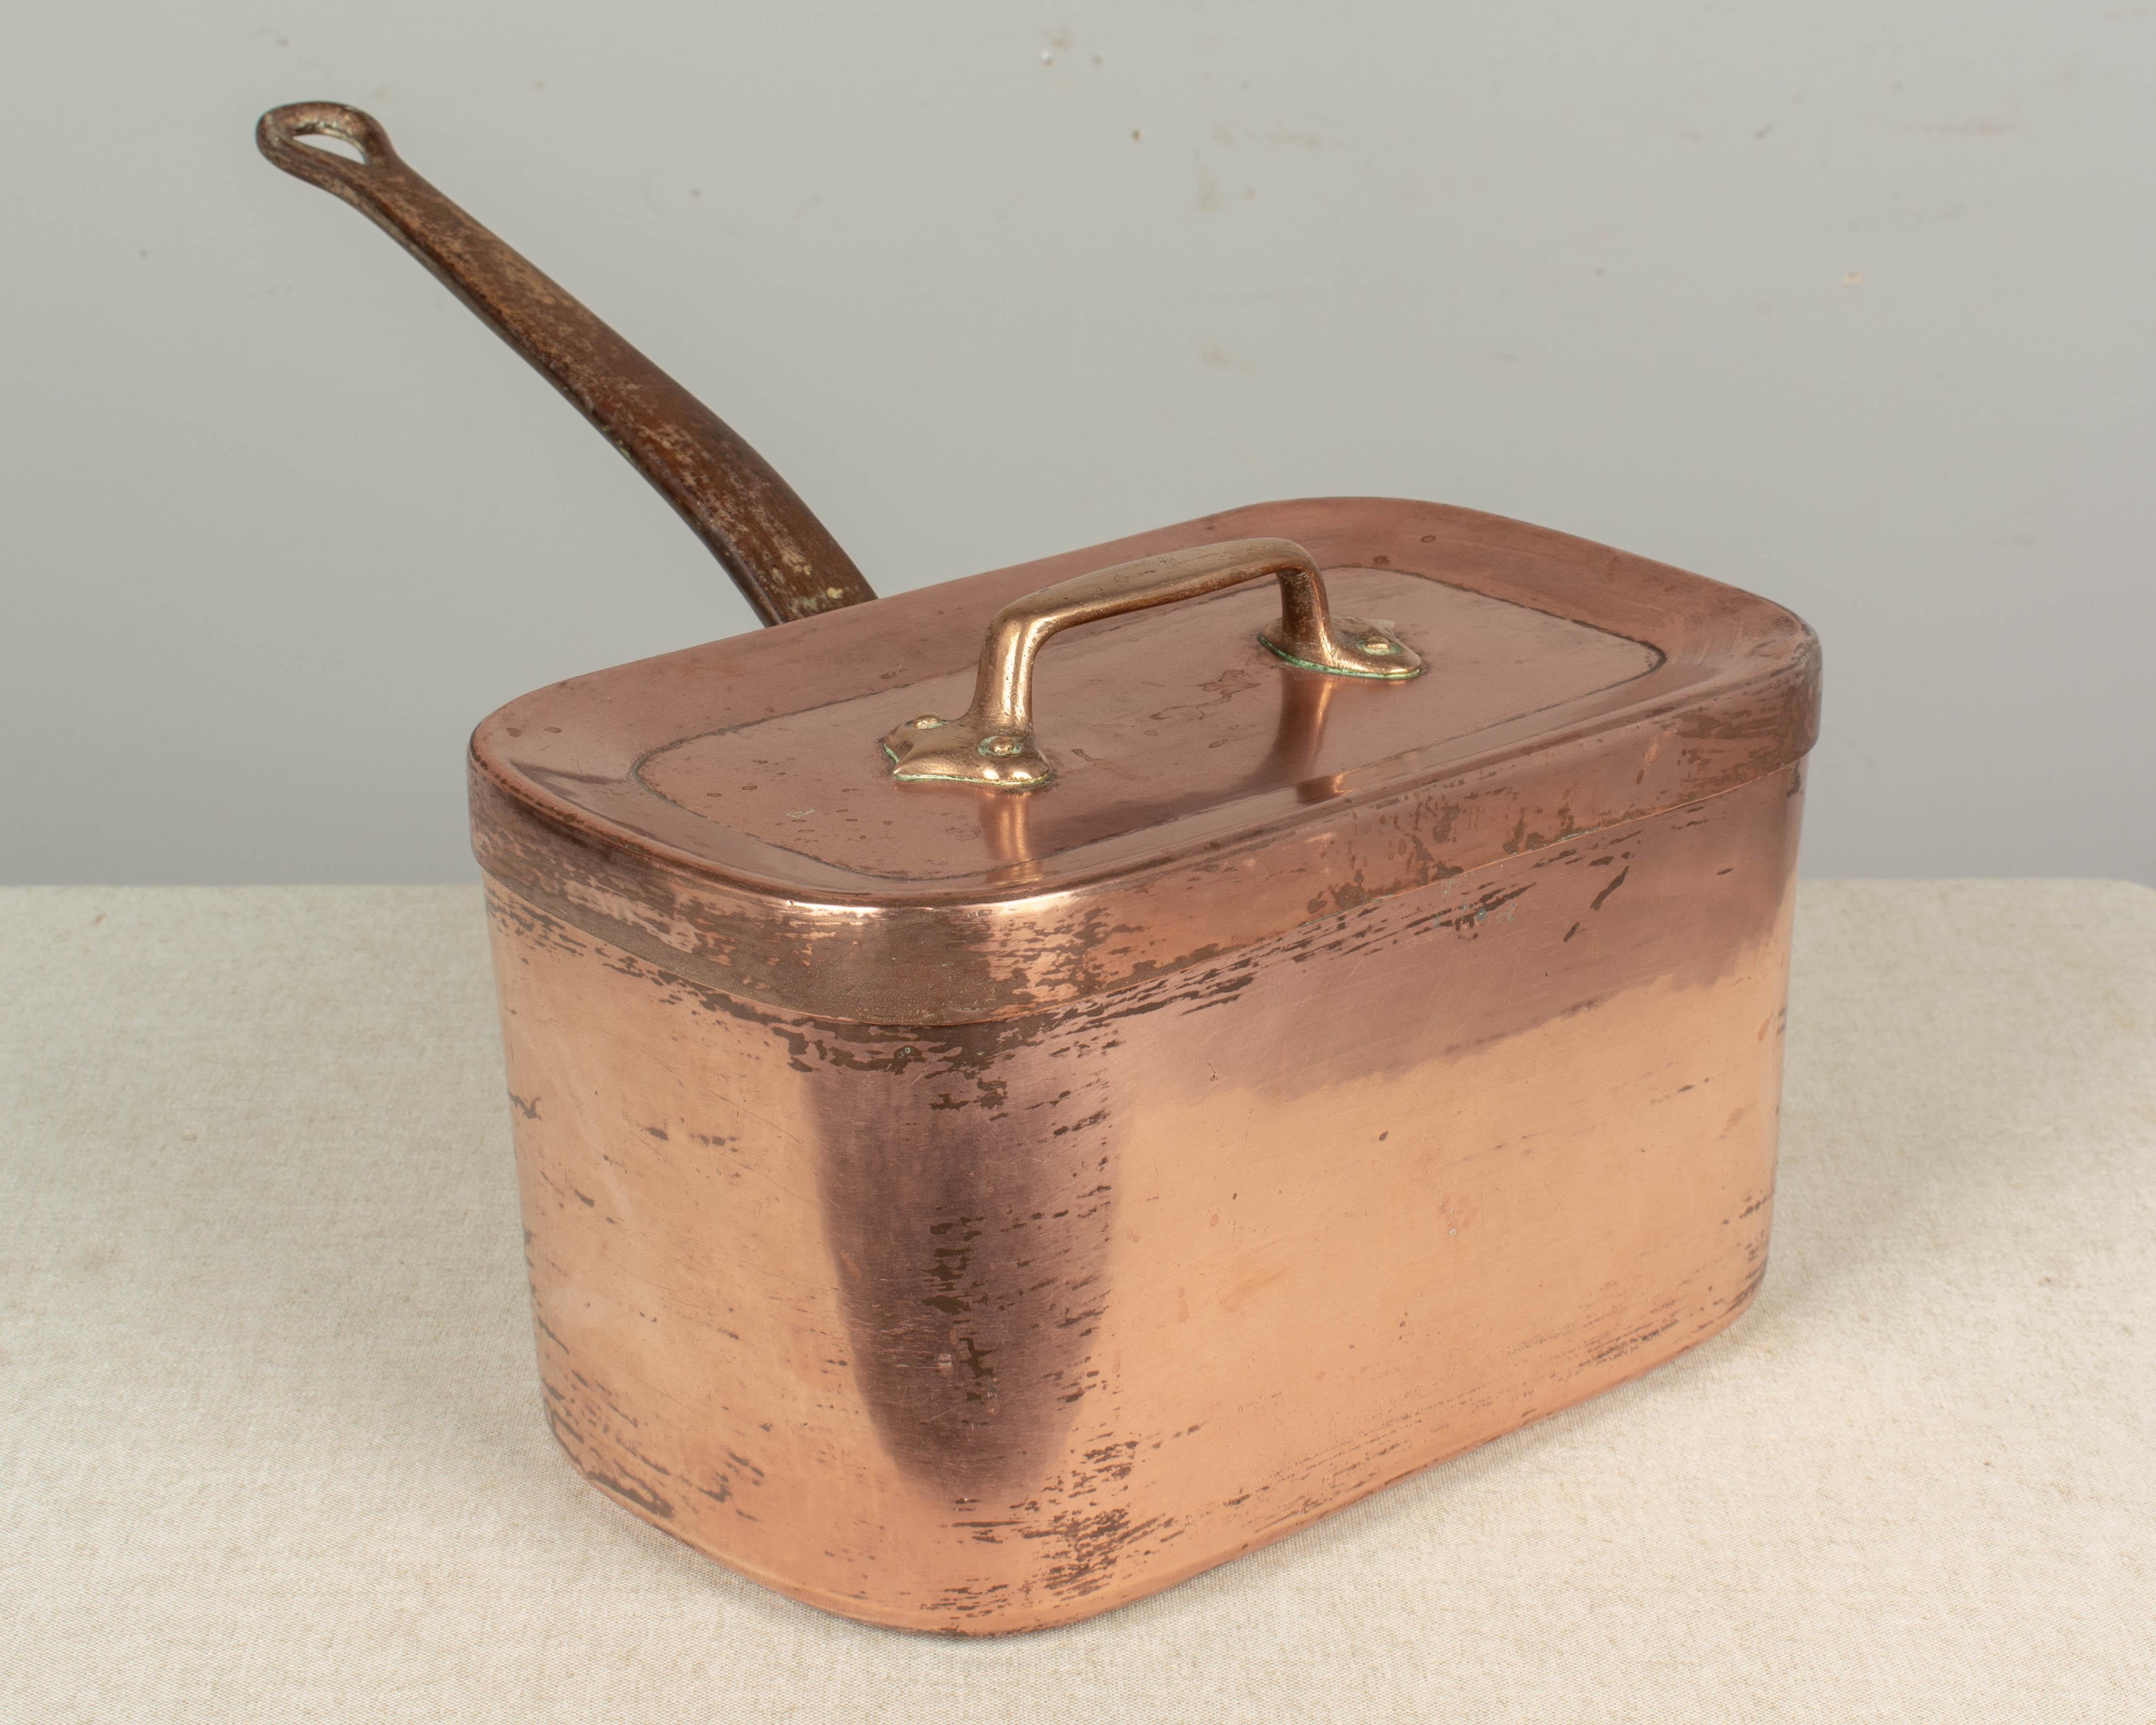 A large 19th century French copper daubiere or braiser pot. A good quality, handmade heavy pot with visible brass castellated or cramped seam on the side. Tight fitting lid with riveted handle. Long, thick cast iron handle, securely afixed with